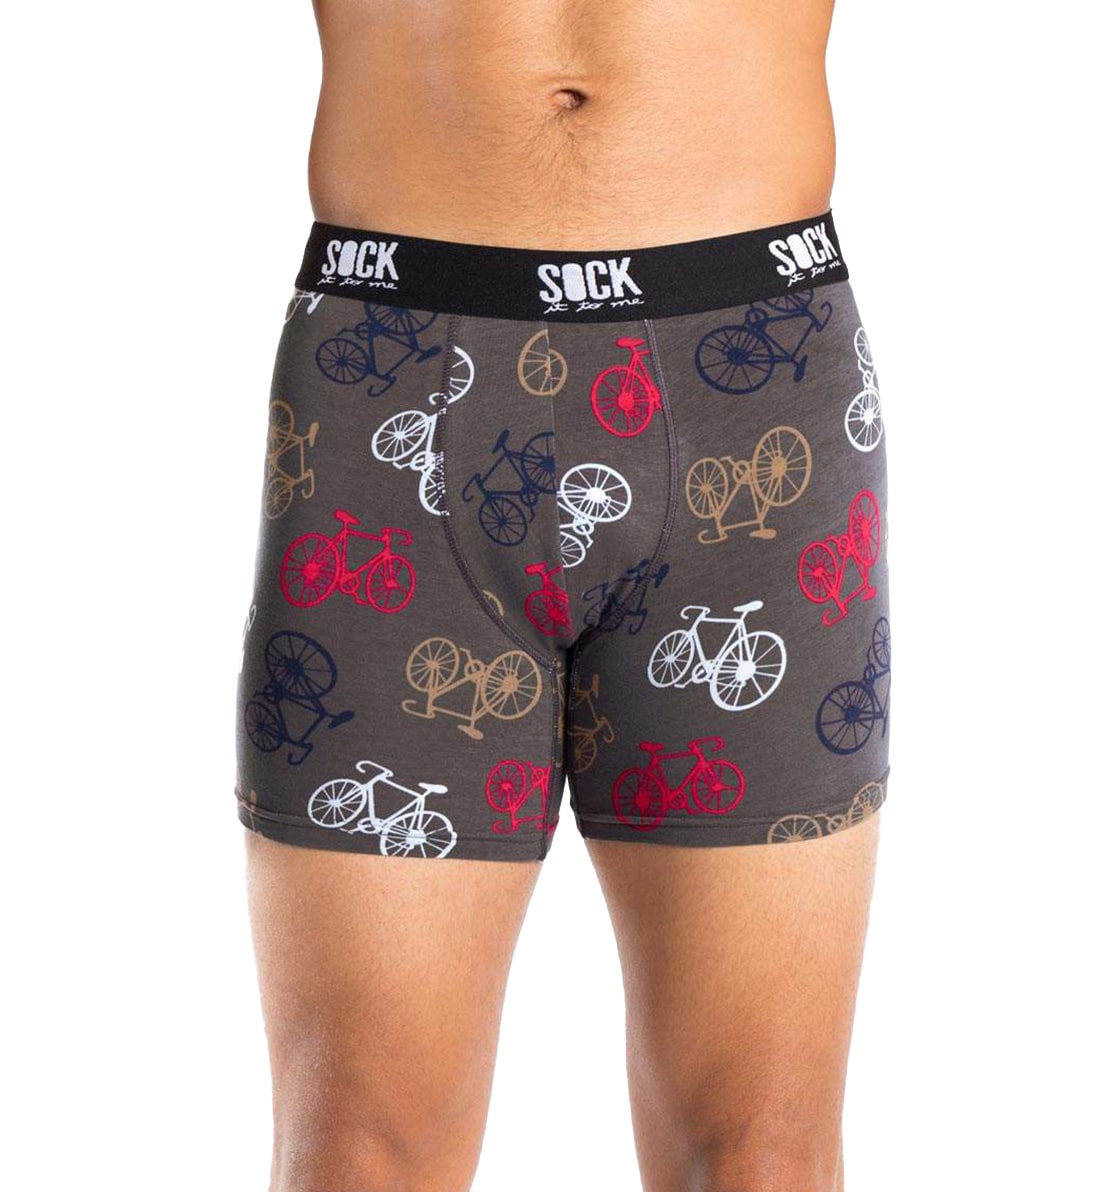 SOCK it to me Men's Boxer Brief (umb030),Small,Large Bikes - Large Bikes,Small